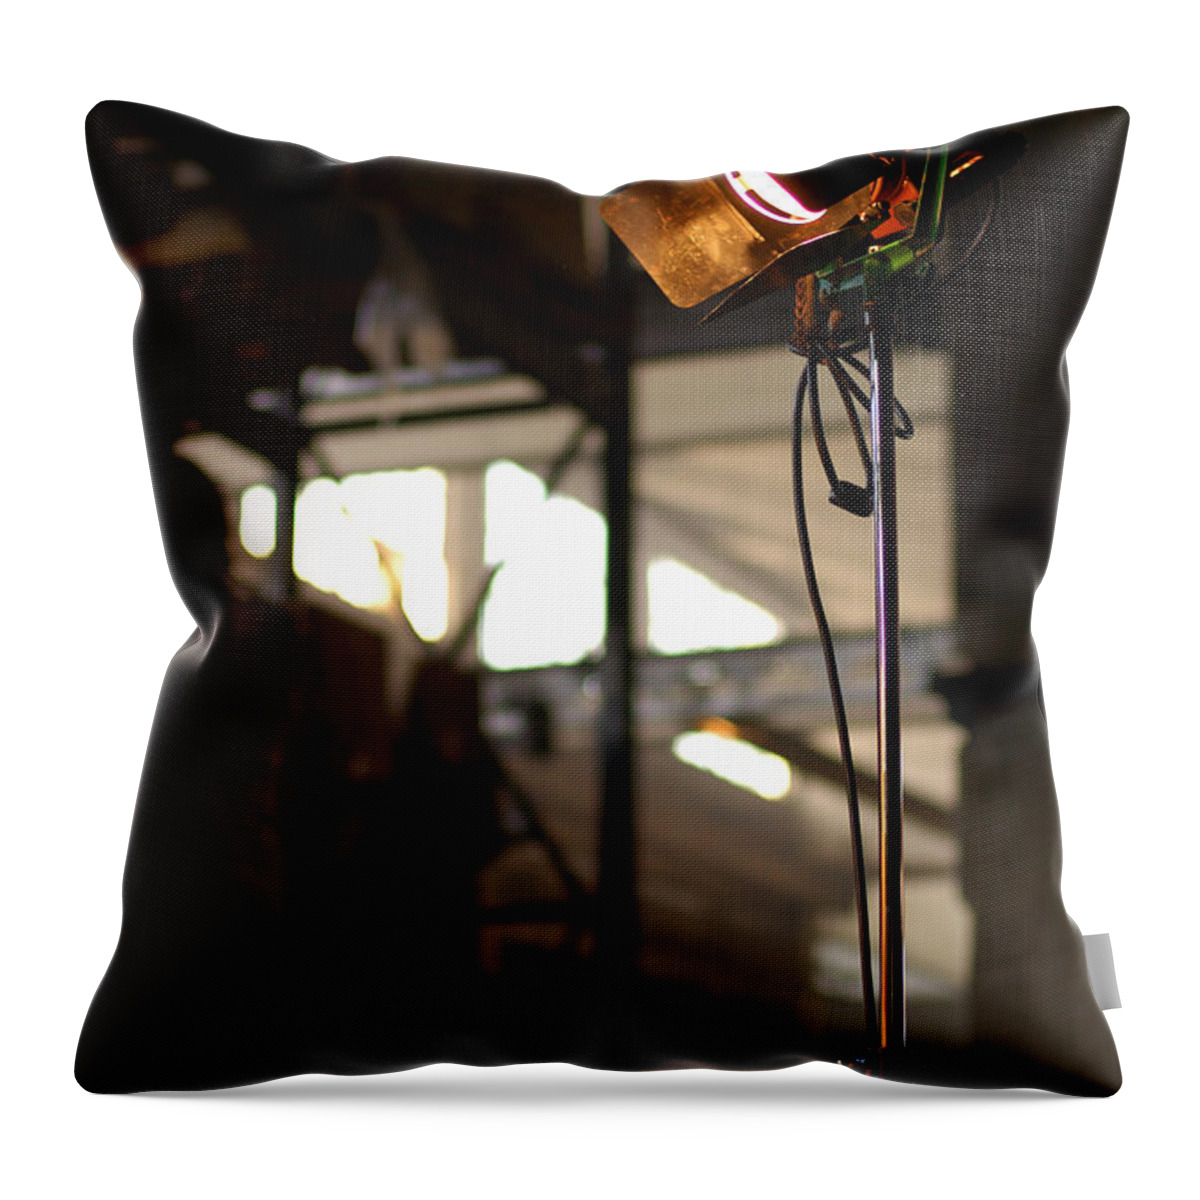 Movie Light Throw Pillow featuring the photograph Movie Light by Micah May